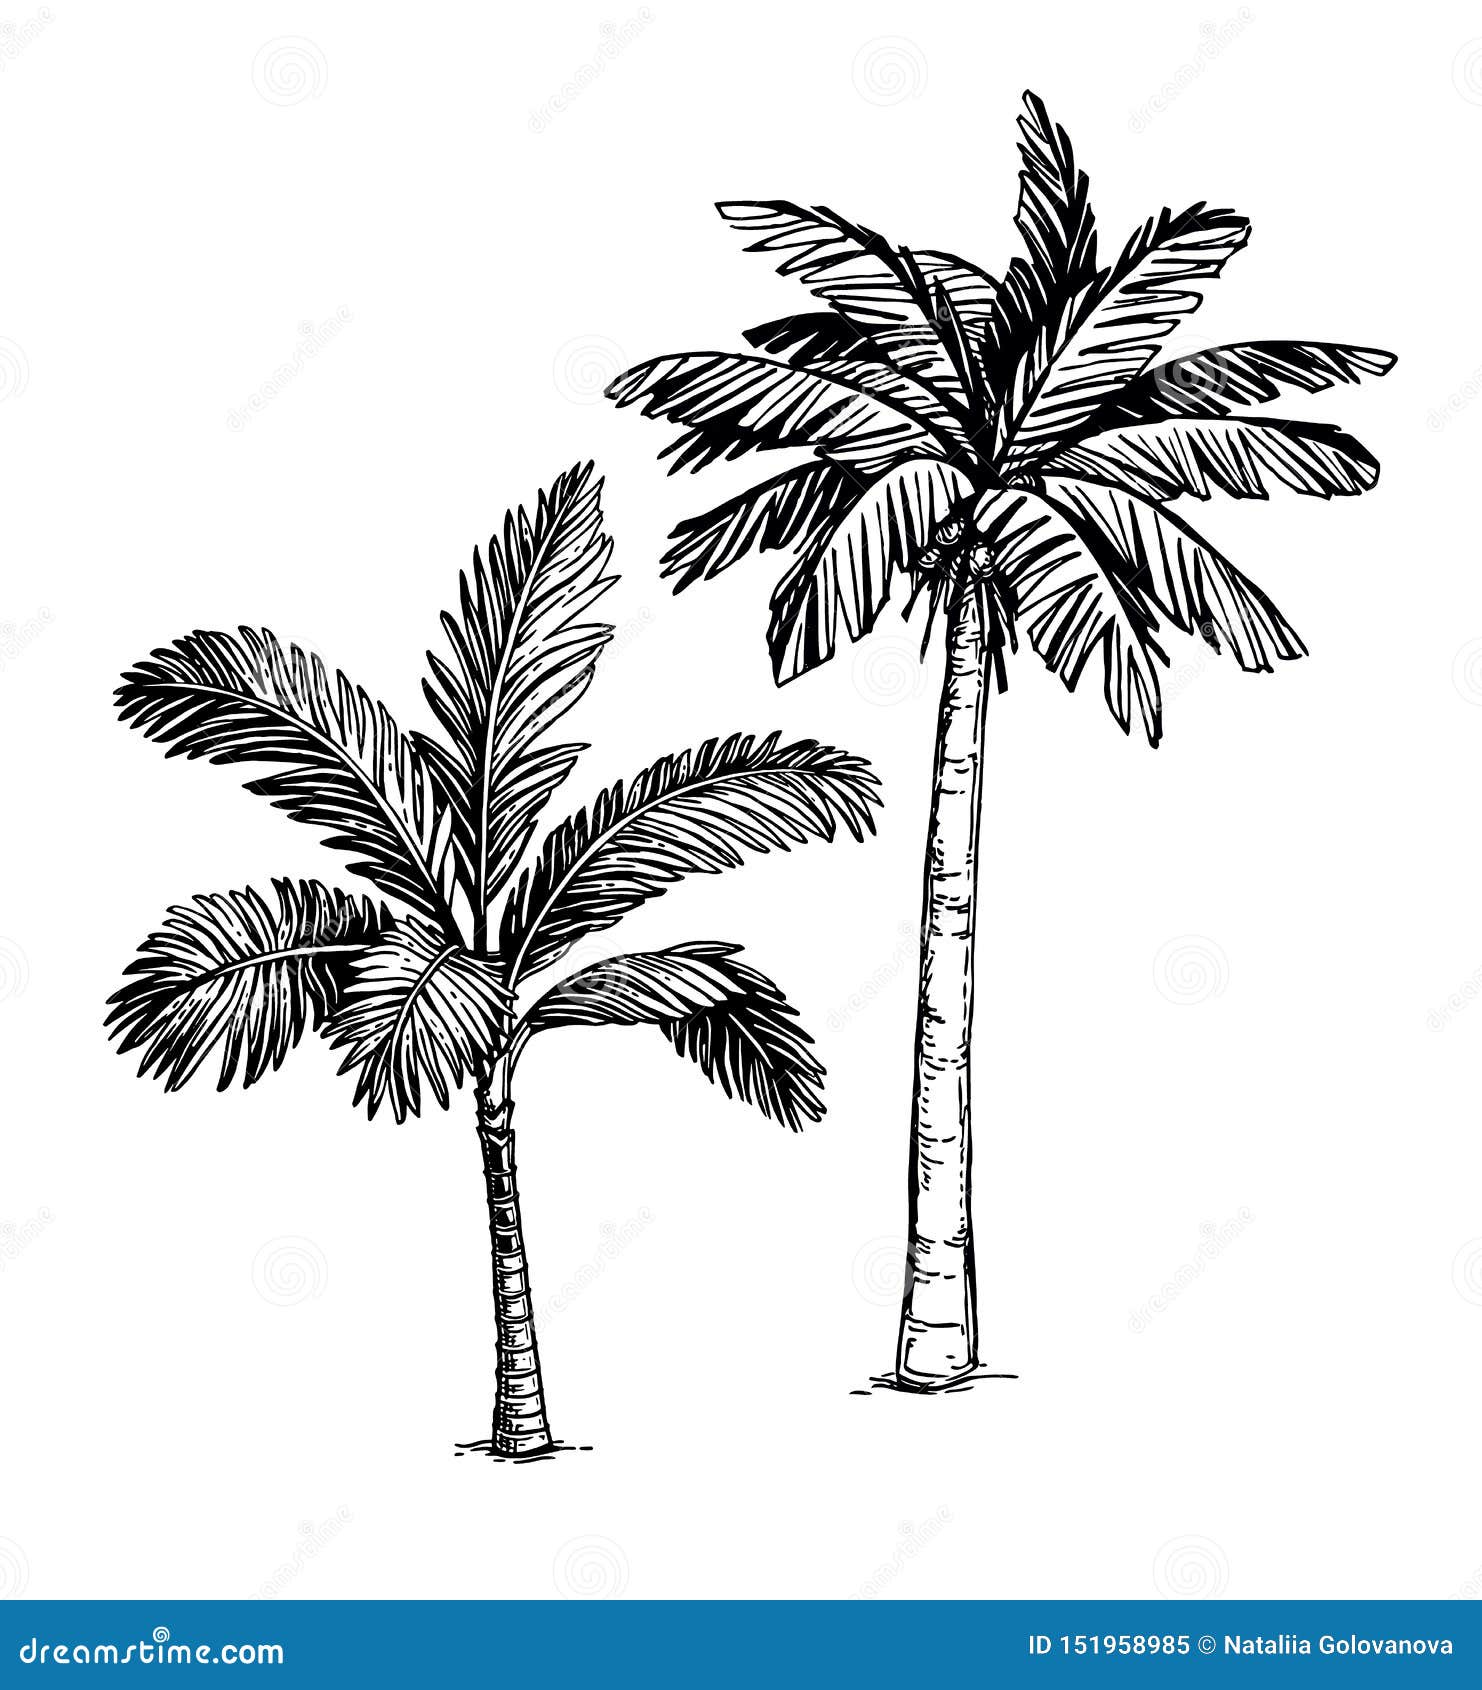 How to Draw a Palm Tree - Easy Drawing Tutorial For Kids